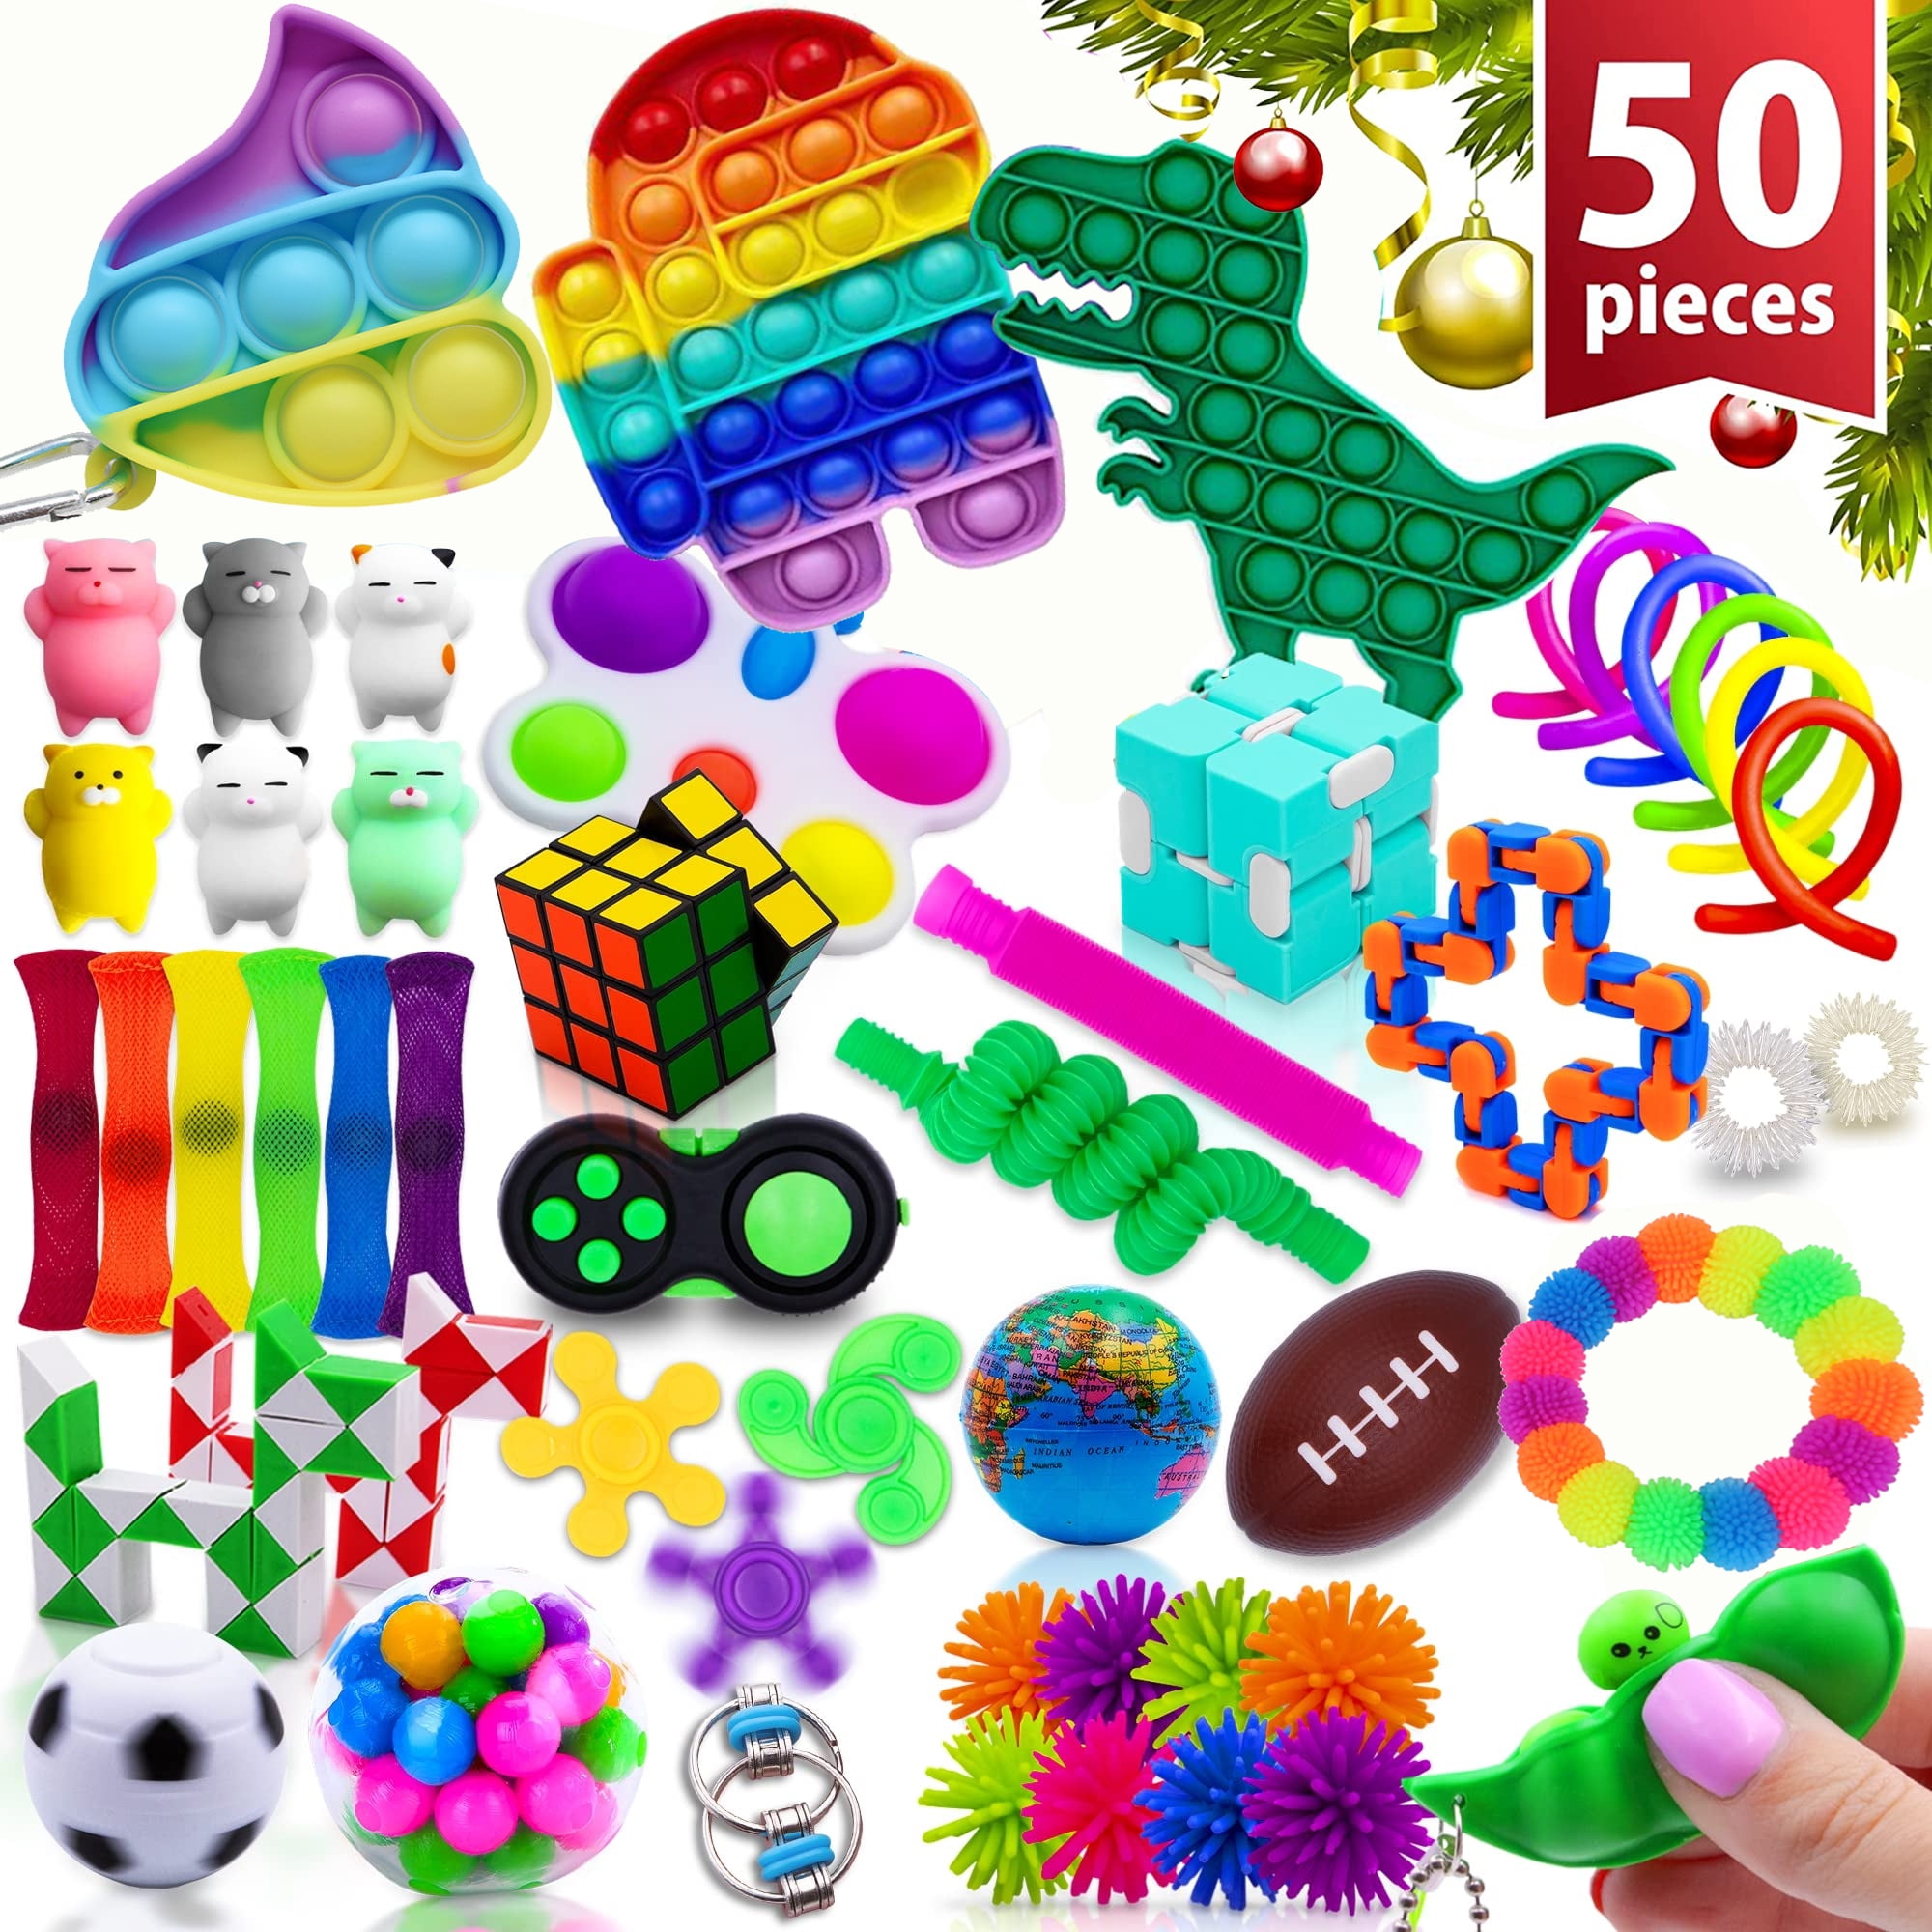 ADHD Fidget Toy 17 pcs Pea Popper Party Favors Fidget Pack Sensory Fidget Toys with Push Pop Infinity Cube Mochi Squish Pinata Goodie Bag Fillers Stress Anxiety Relieve Stretchy Noodles 